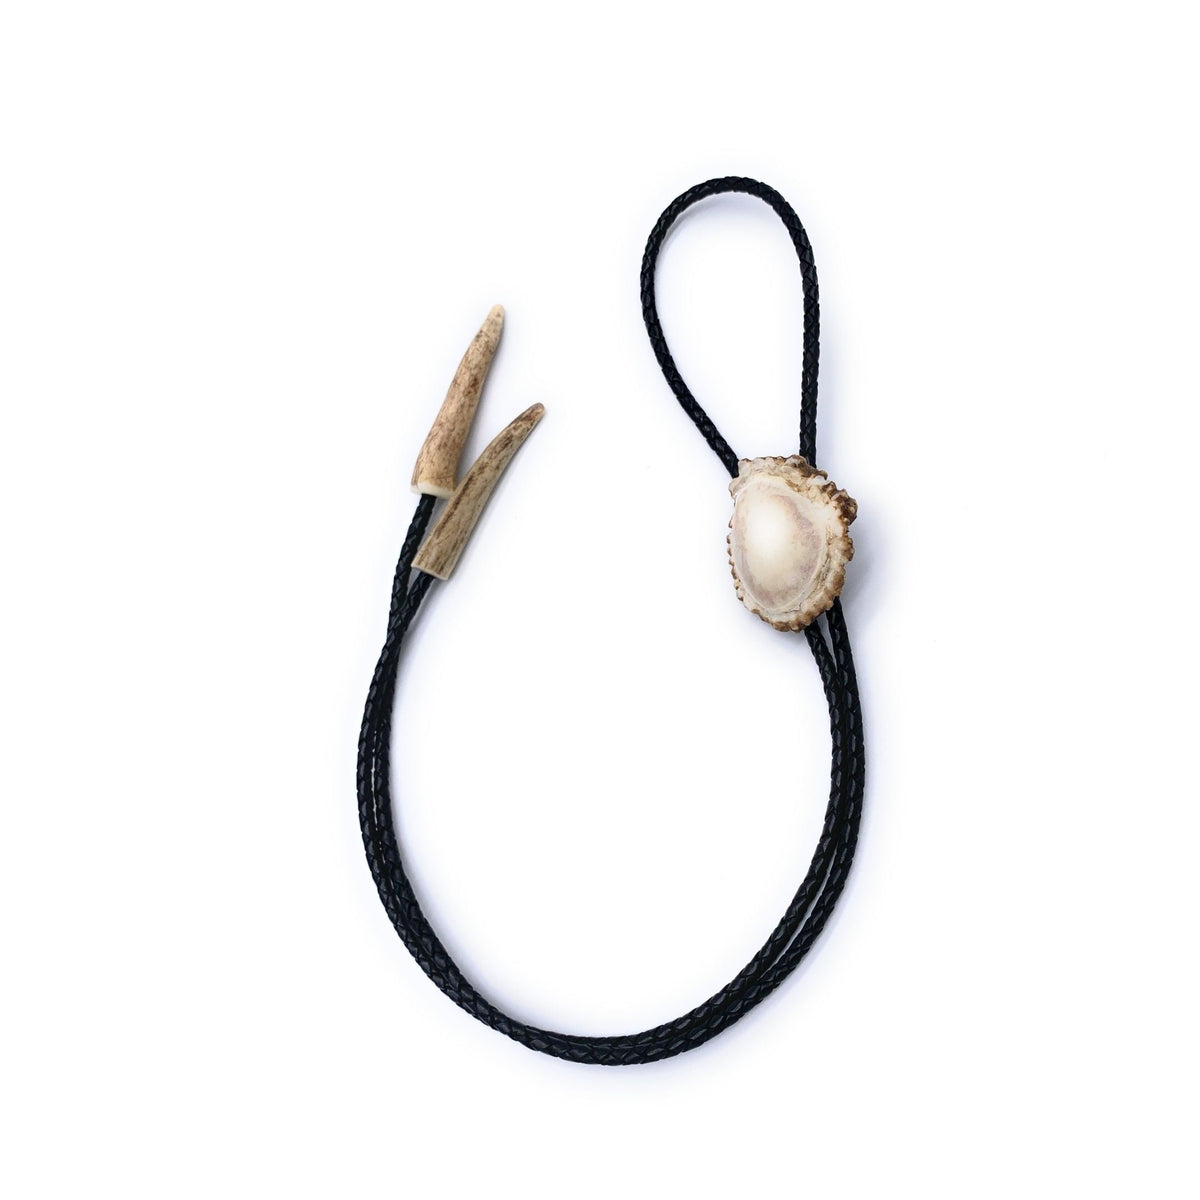 Polished Deer Antler Burr Bolo Tie w/ Antler Tips - Hunting Lodge Country Nature Stationary Hunter Boyfriend Camping Office Gifts Him Neck